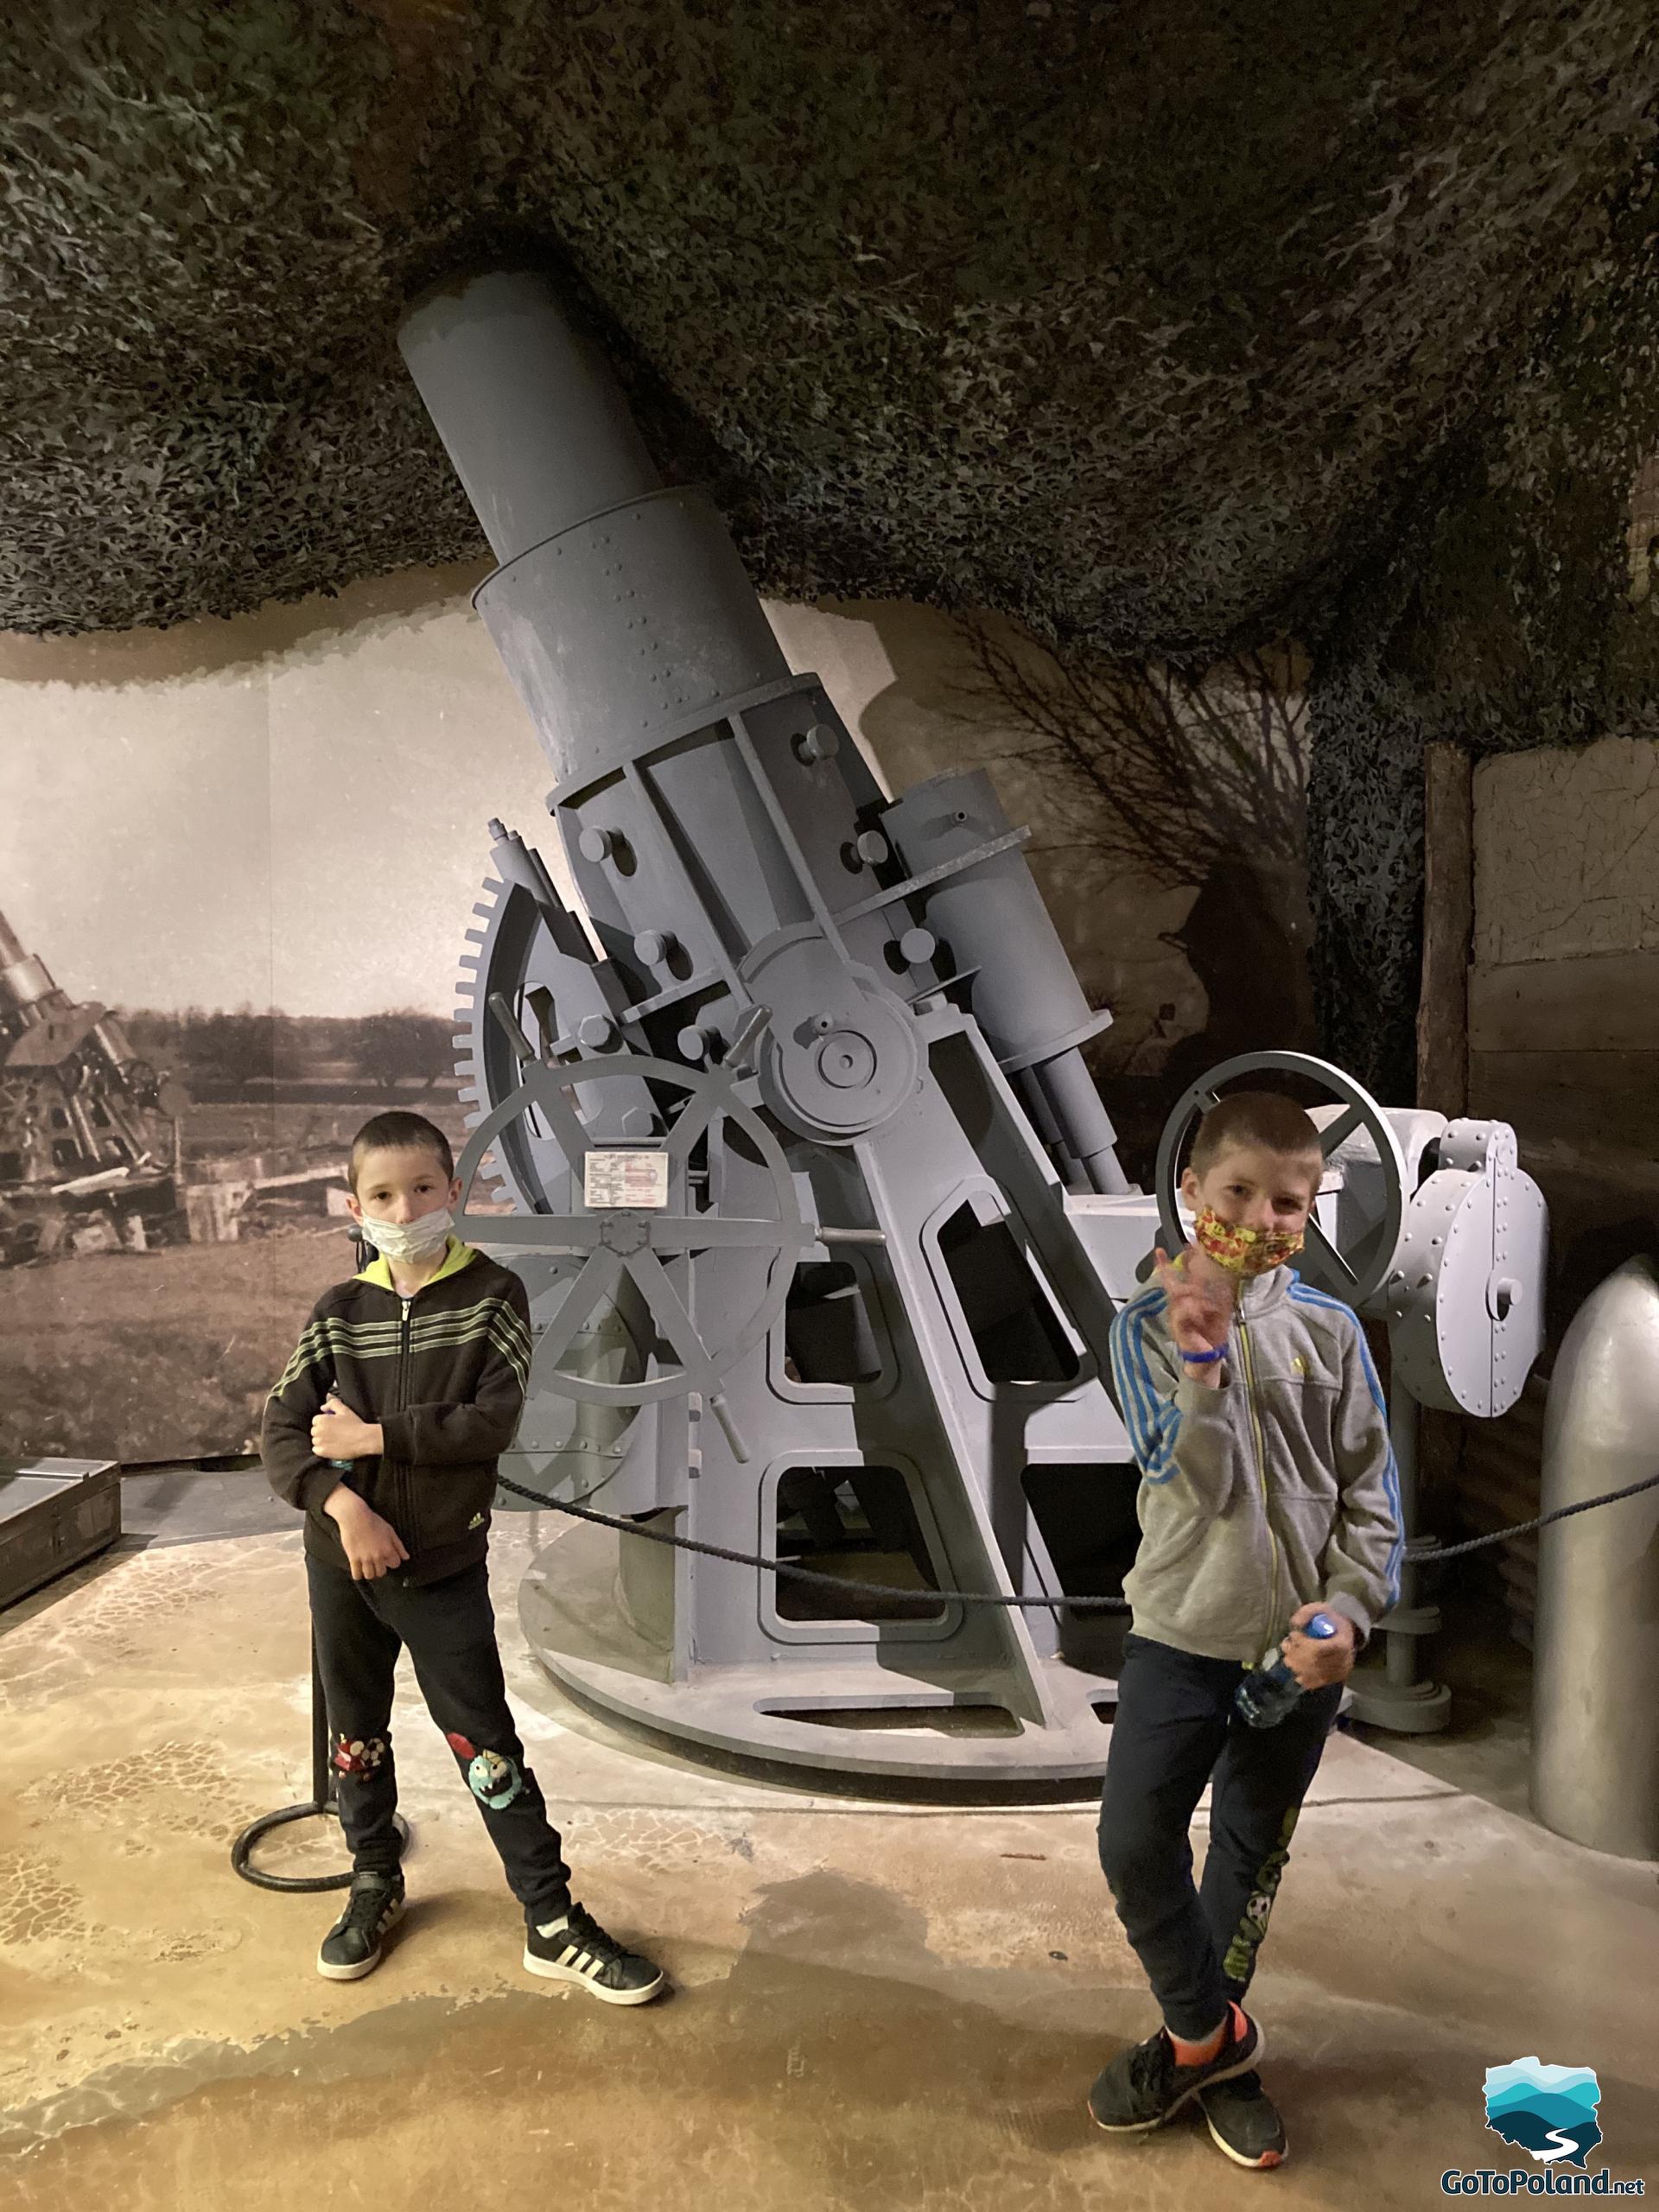 A large, grey cannon and two boys in front of it.